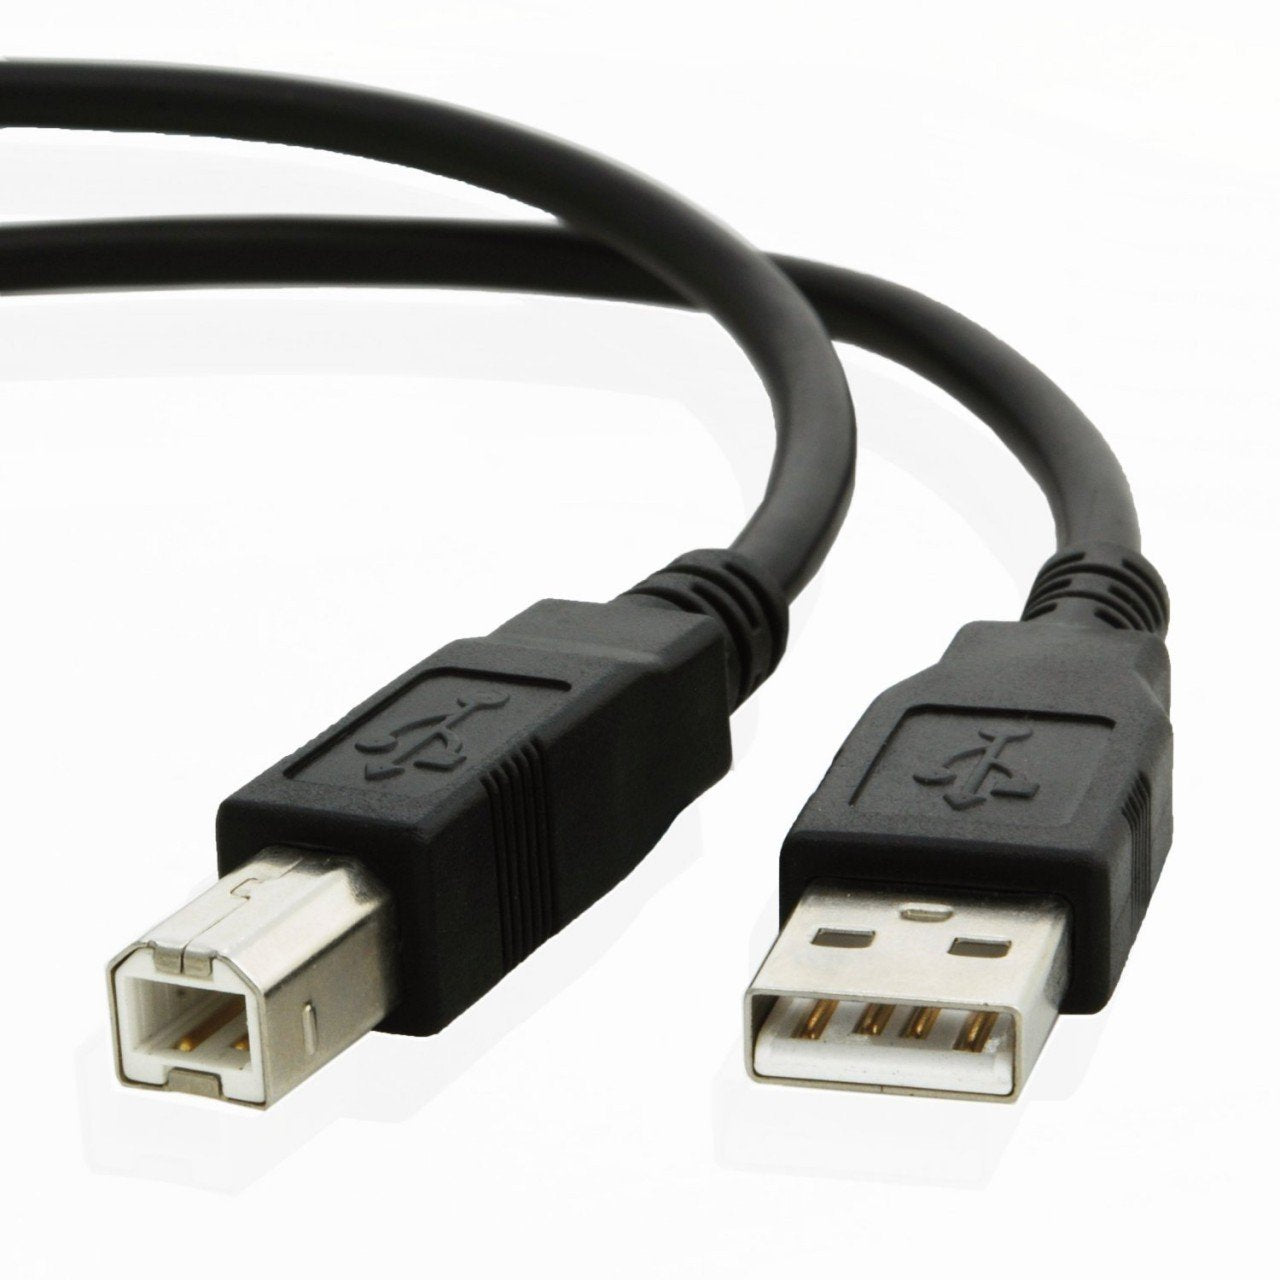 USB cable for Roland DIGITAL PIANO FP-30